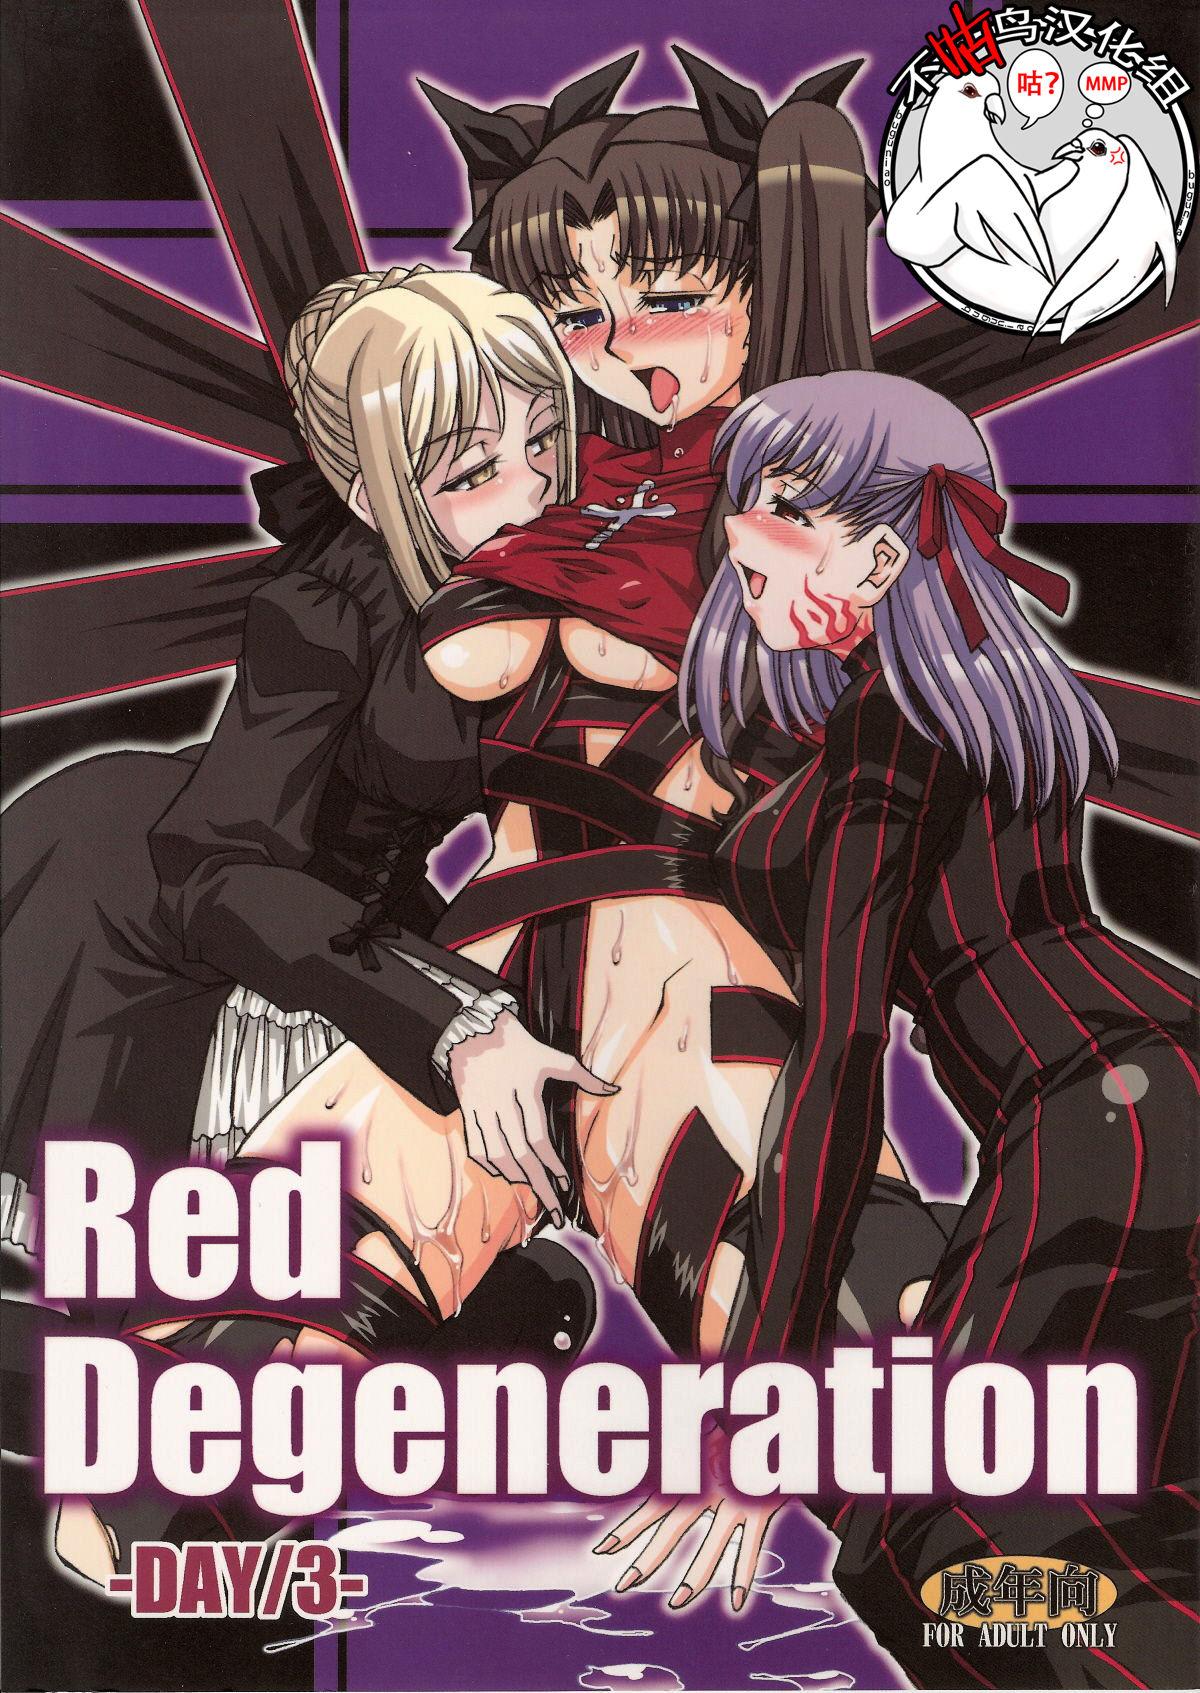 Plumper Red Degeneration - Fate stay night Spycam - Picture 1